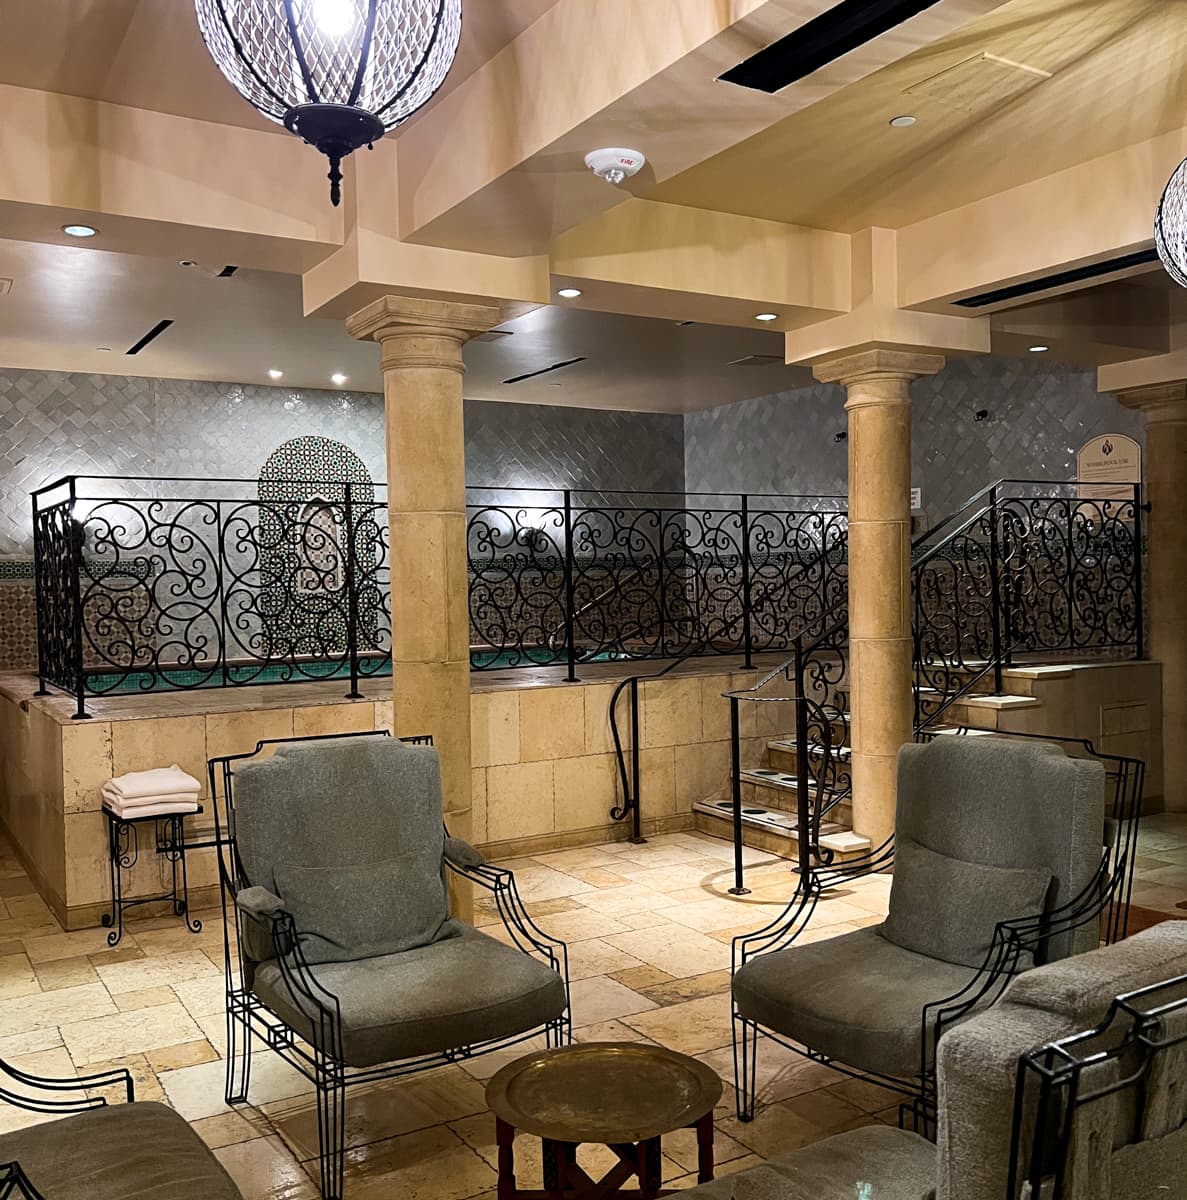 One of the best spas in Scottsdale, Joya Spa at the Omni Montelucia